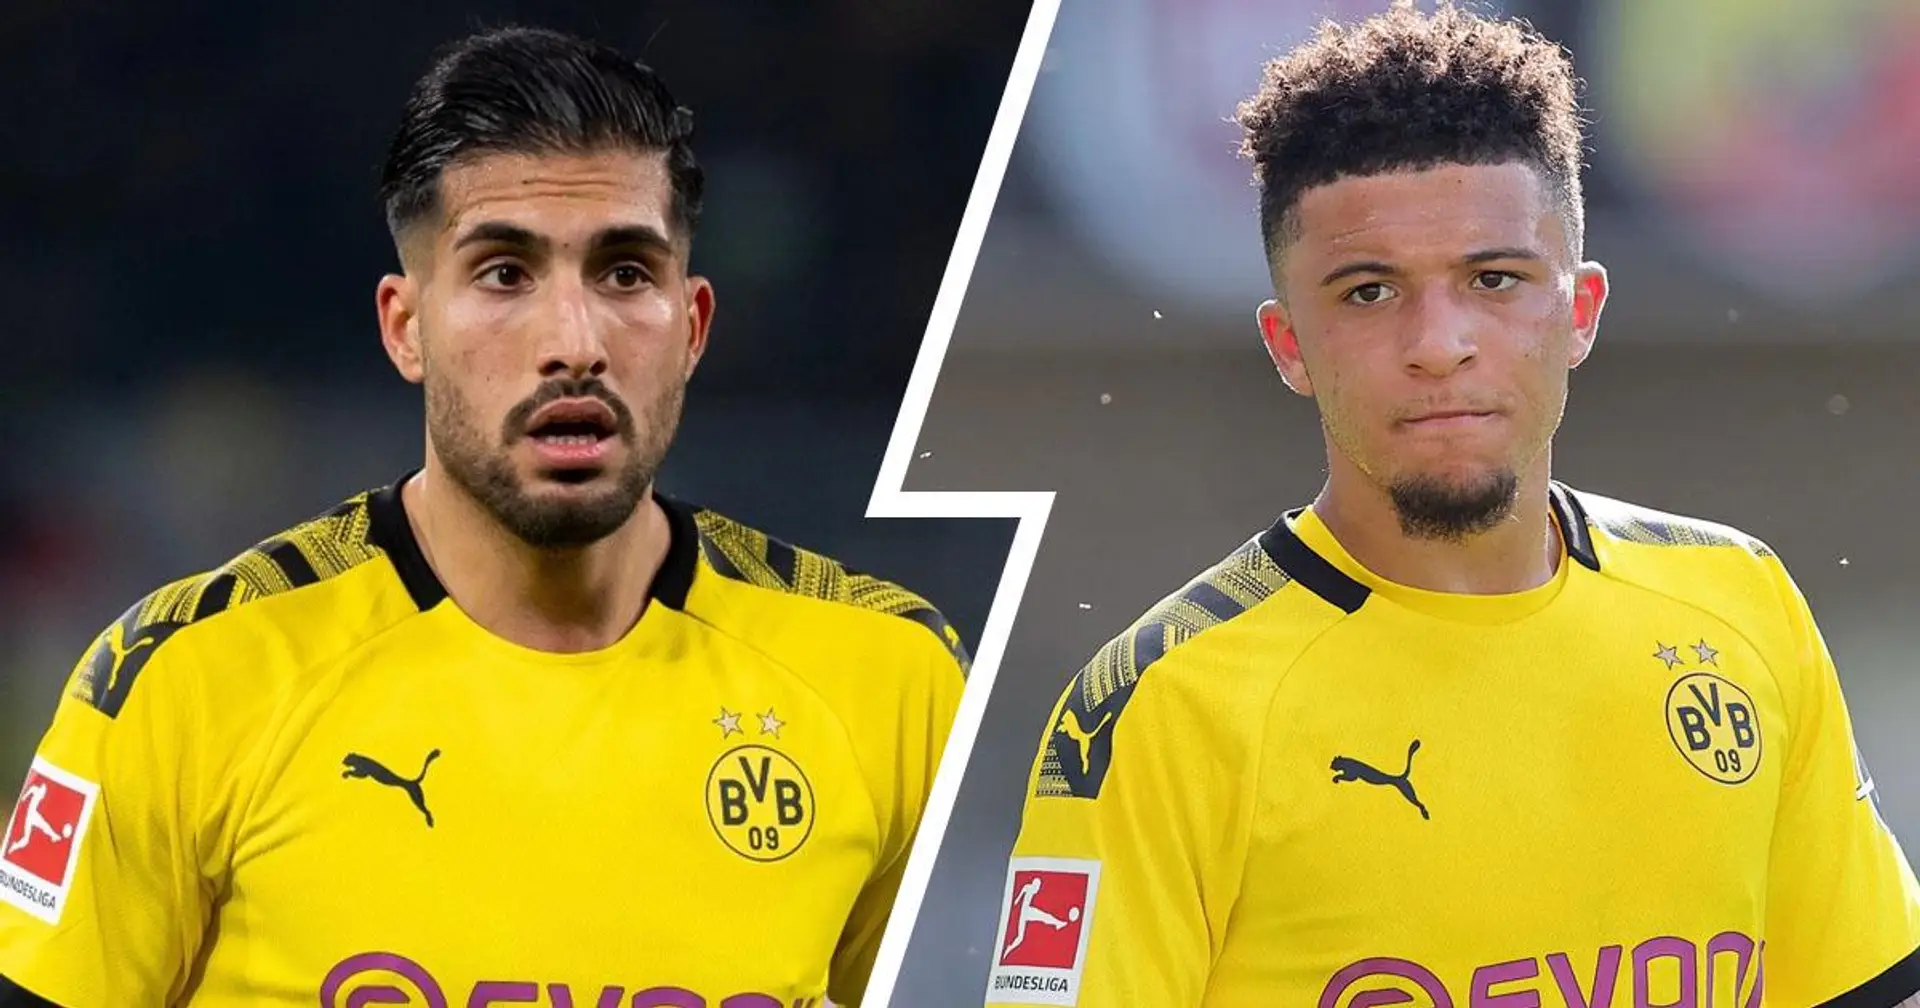 ‘He needs to grow up’: Emre Can tells Sancho 'to be smarter’ after Dortmund gem was fined for violating lockdown restrictions